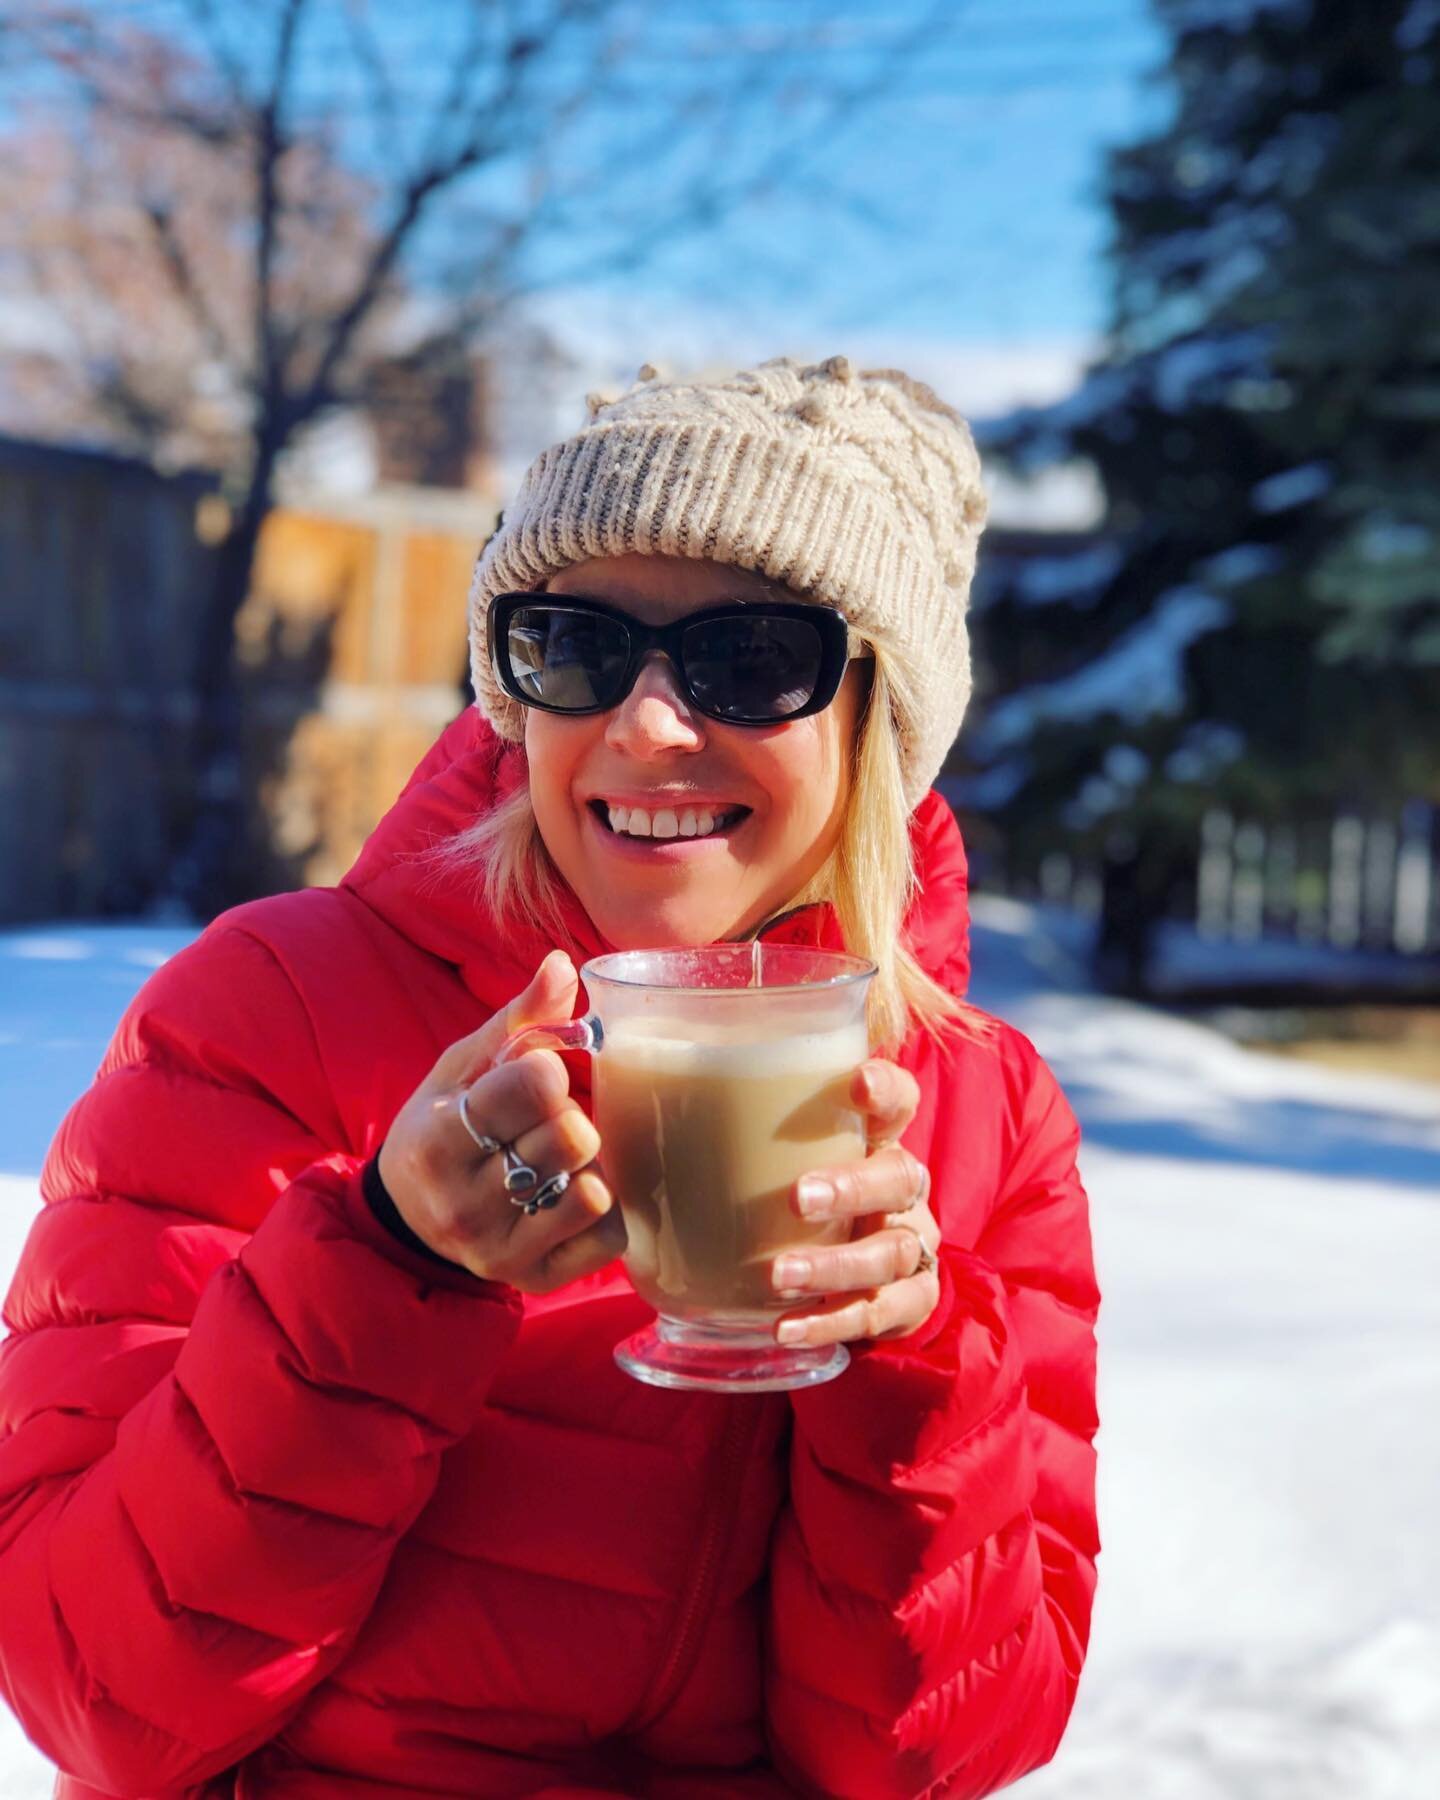 Winter is well and truly here and I&rsquo;m in full hygge mode! 

Since discovering the Danish concept of hygge many years ago, I&rsquo;ve been fascinated by its health benefits. It has improved my mental, emotional and physical well-being while livi